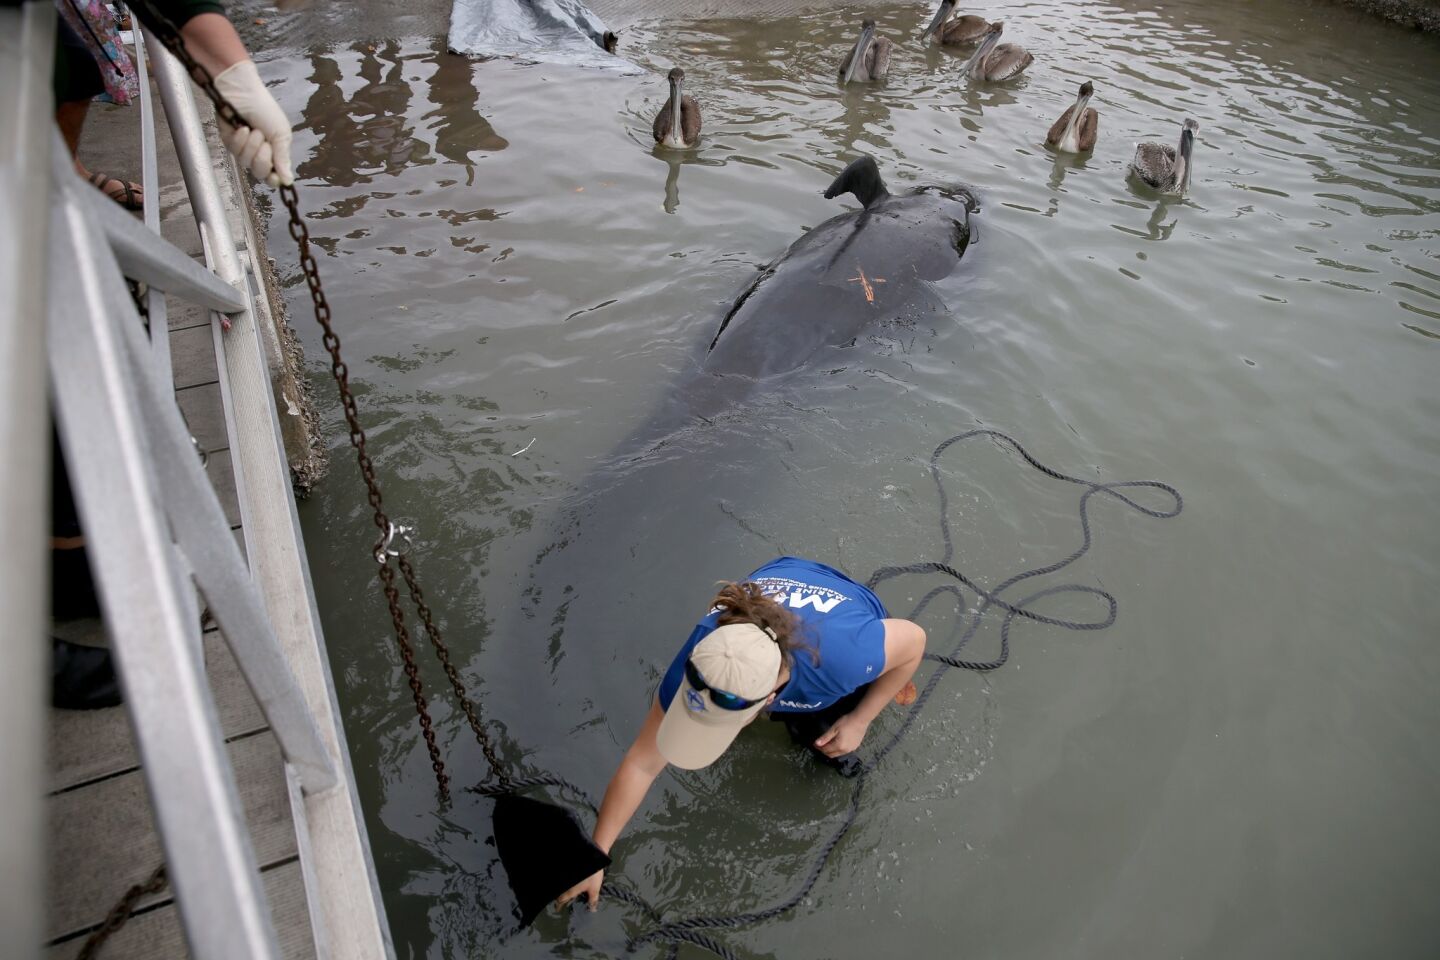 Rebeccah Hazelkorn a biologist for Mote Marine Laboratory helps remove a dead pilot whale from the water to be transported to a facility for a necropsy by the National Oceanic and Atmospheric Administration's Fisheries Service on January 21, 2014 in Estero, Florida.